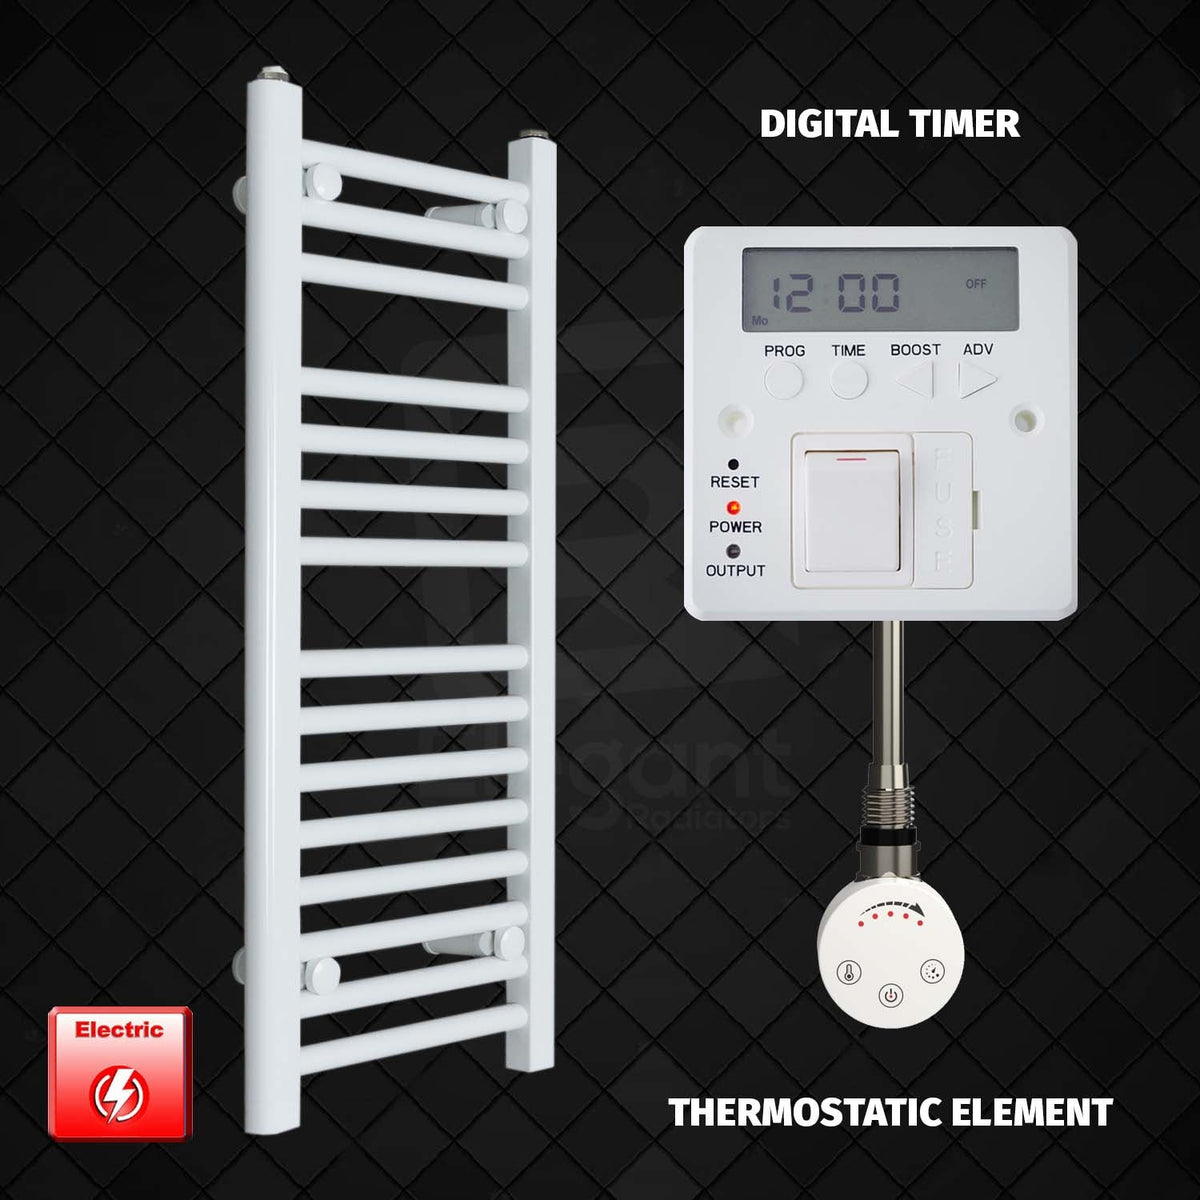 800 x 400 Pre-Filled Electric Heated Towel Radiator White Thermostatic Element Digital Timer